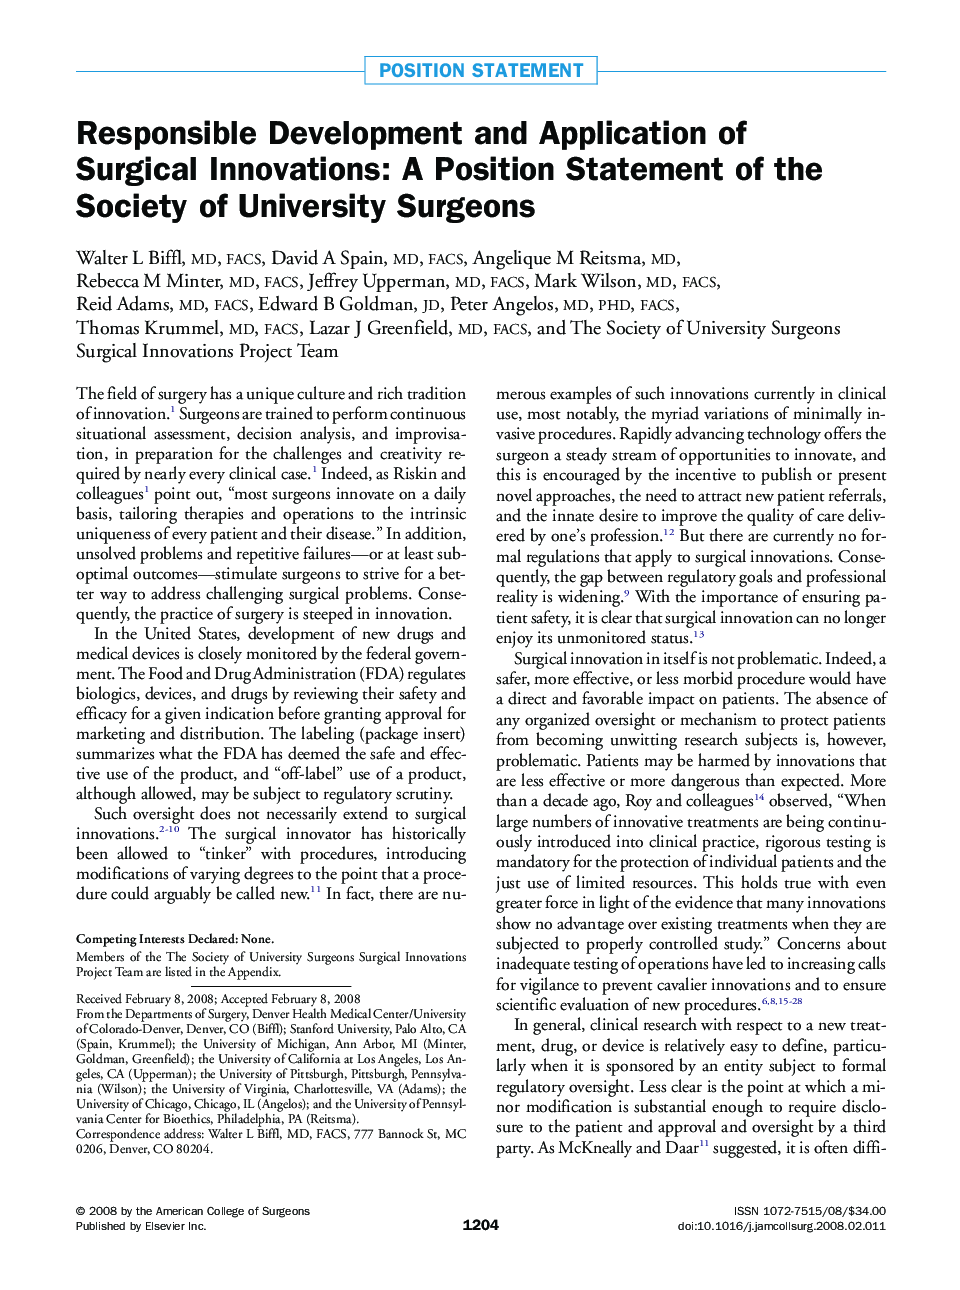 Responsible Development and Application of Surgical Innovations: A Position Statement of the Society of University Surgeons